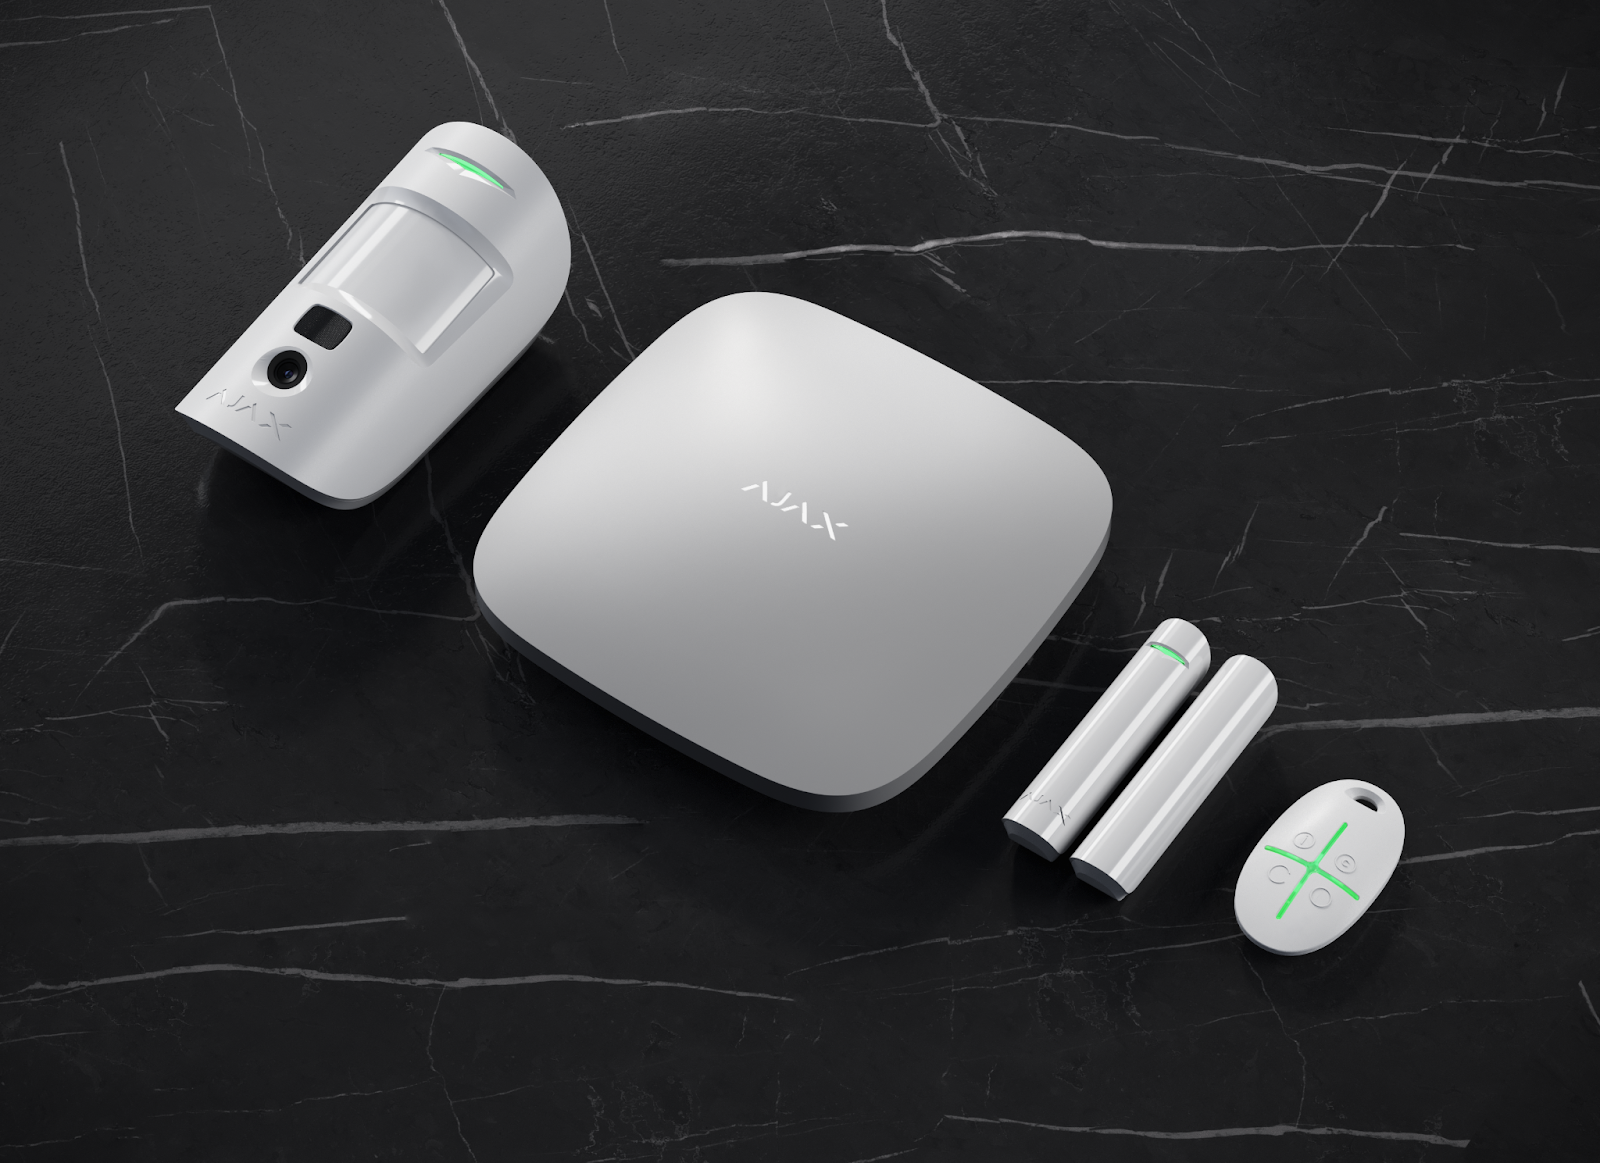 Ajax is a smart wireless alarm that protects from burglary, fire, and flood